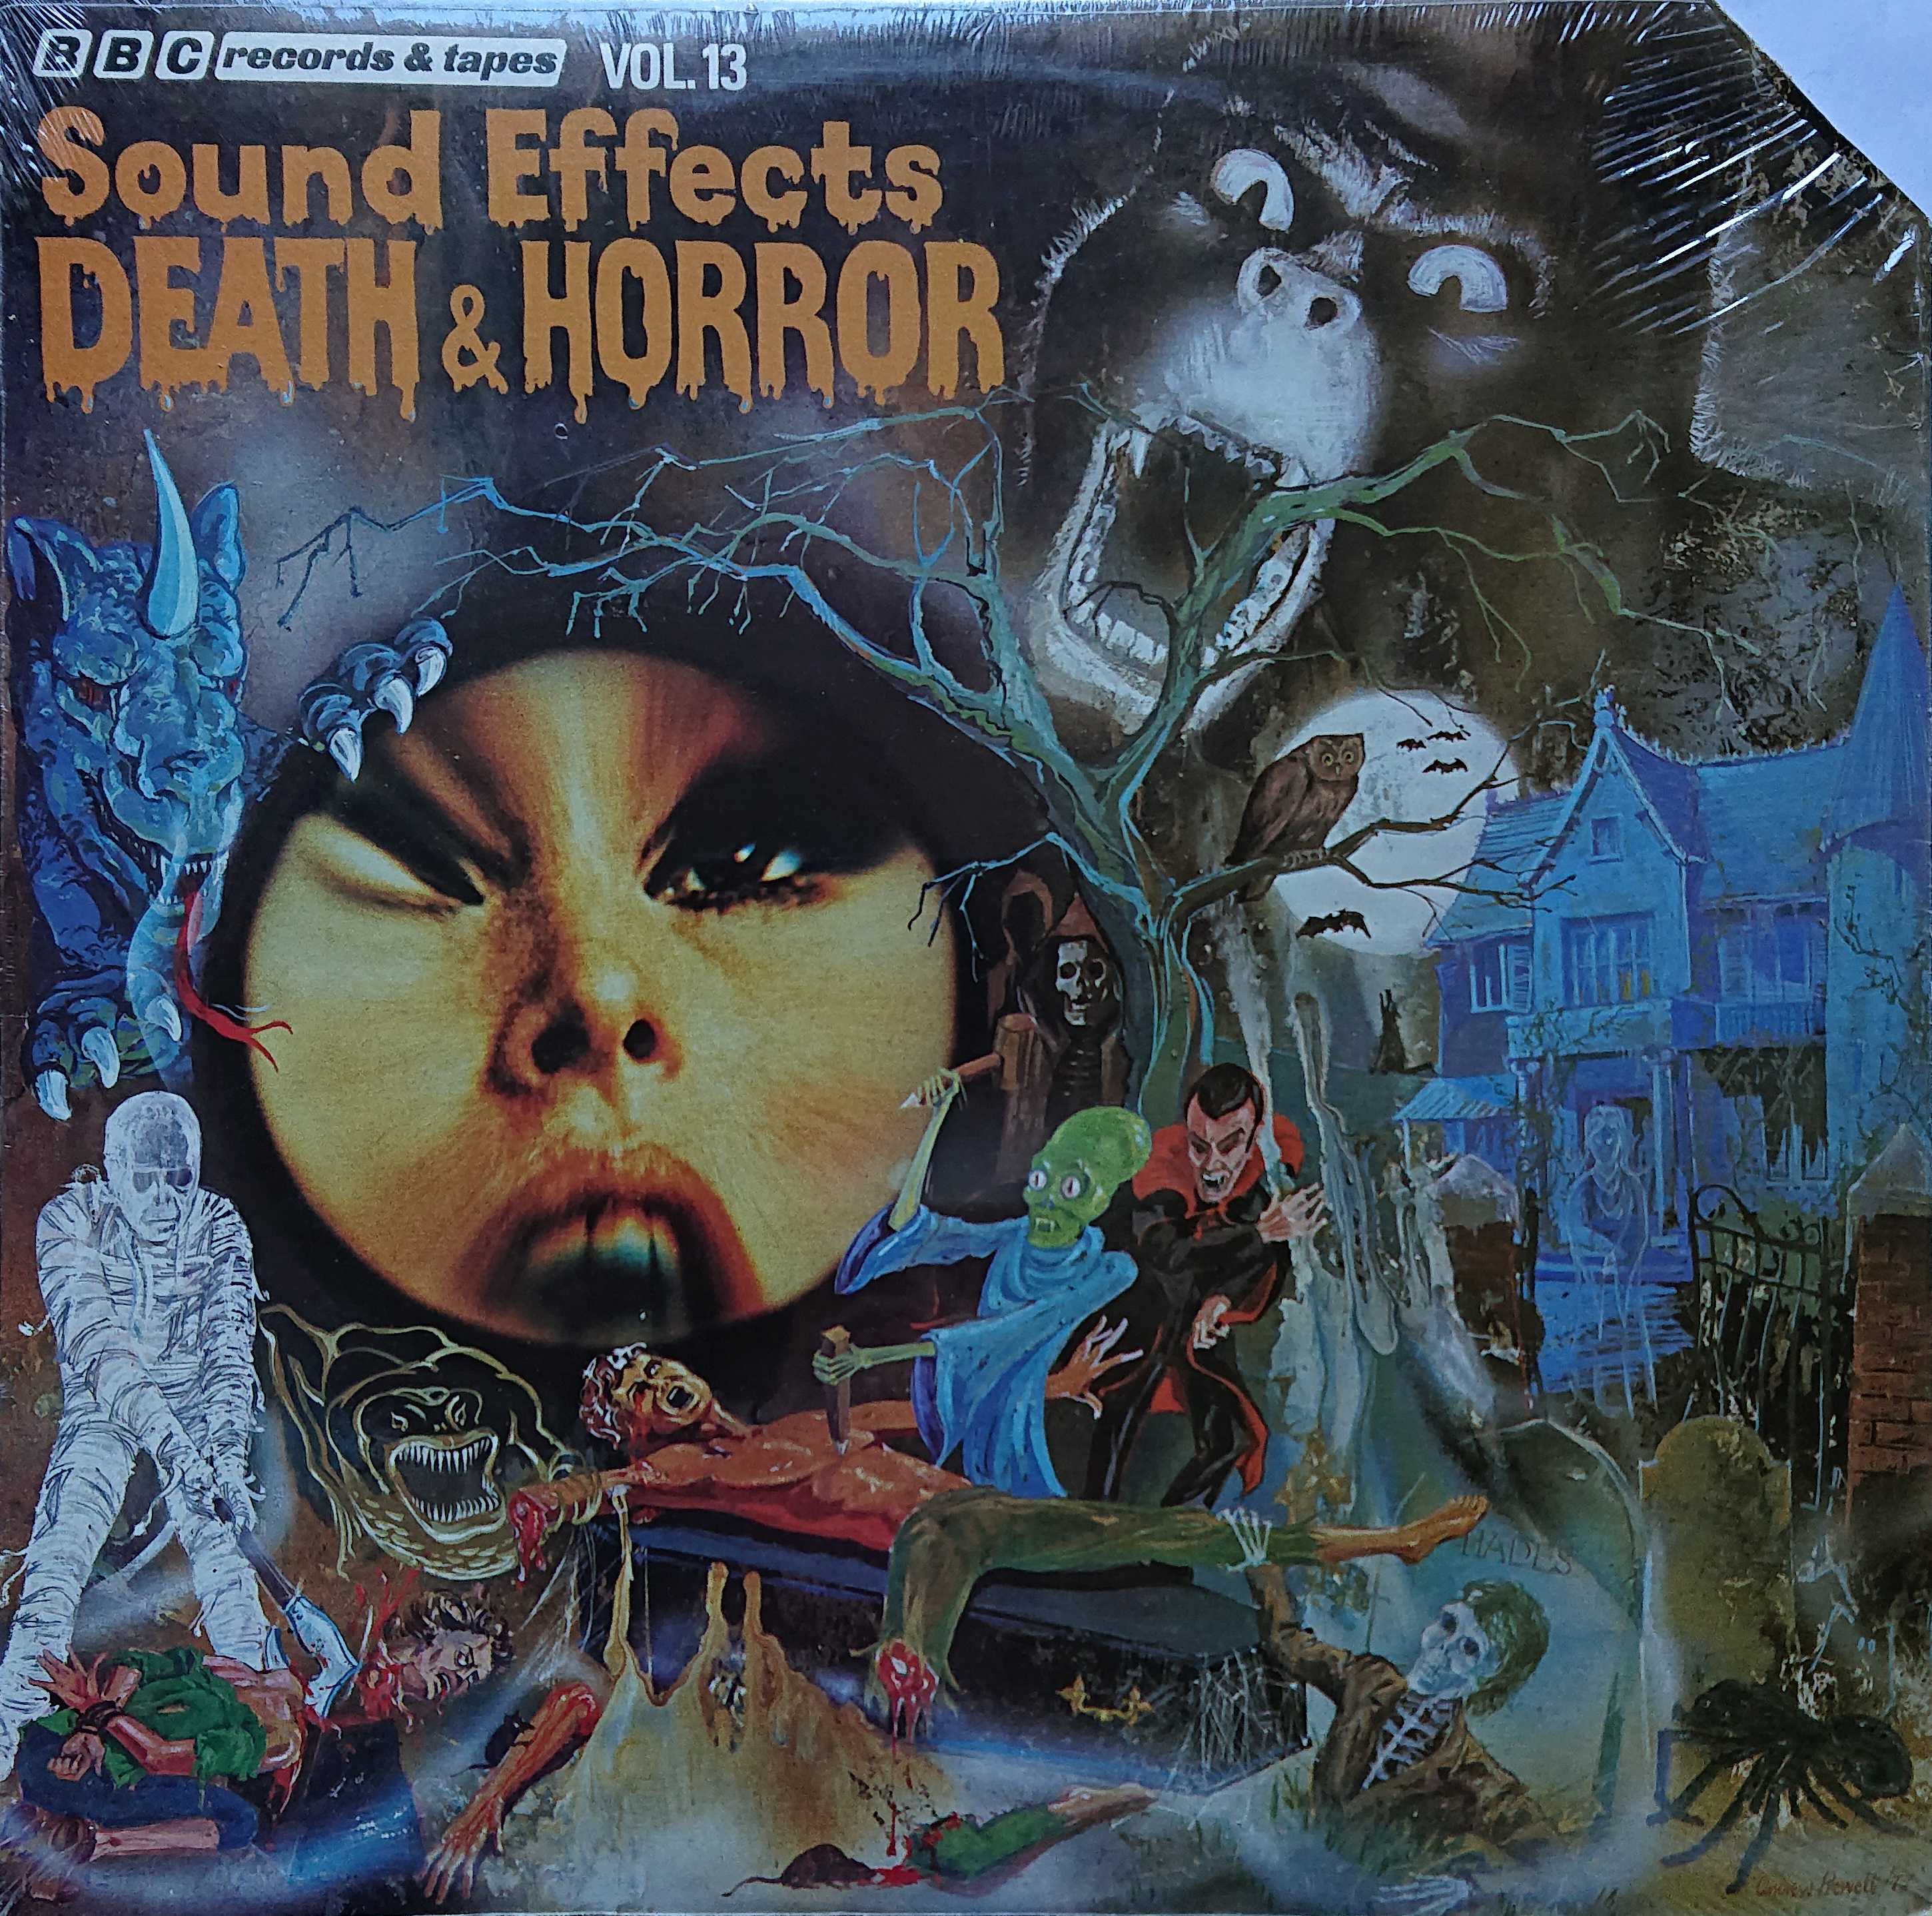 Picture of TRC - 911 Death and horror sound effects by artist Mike Harding from the BBC albums - Records and Tapes library